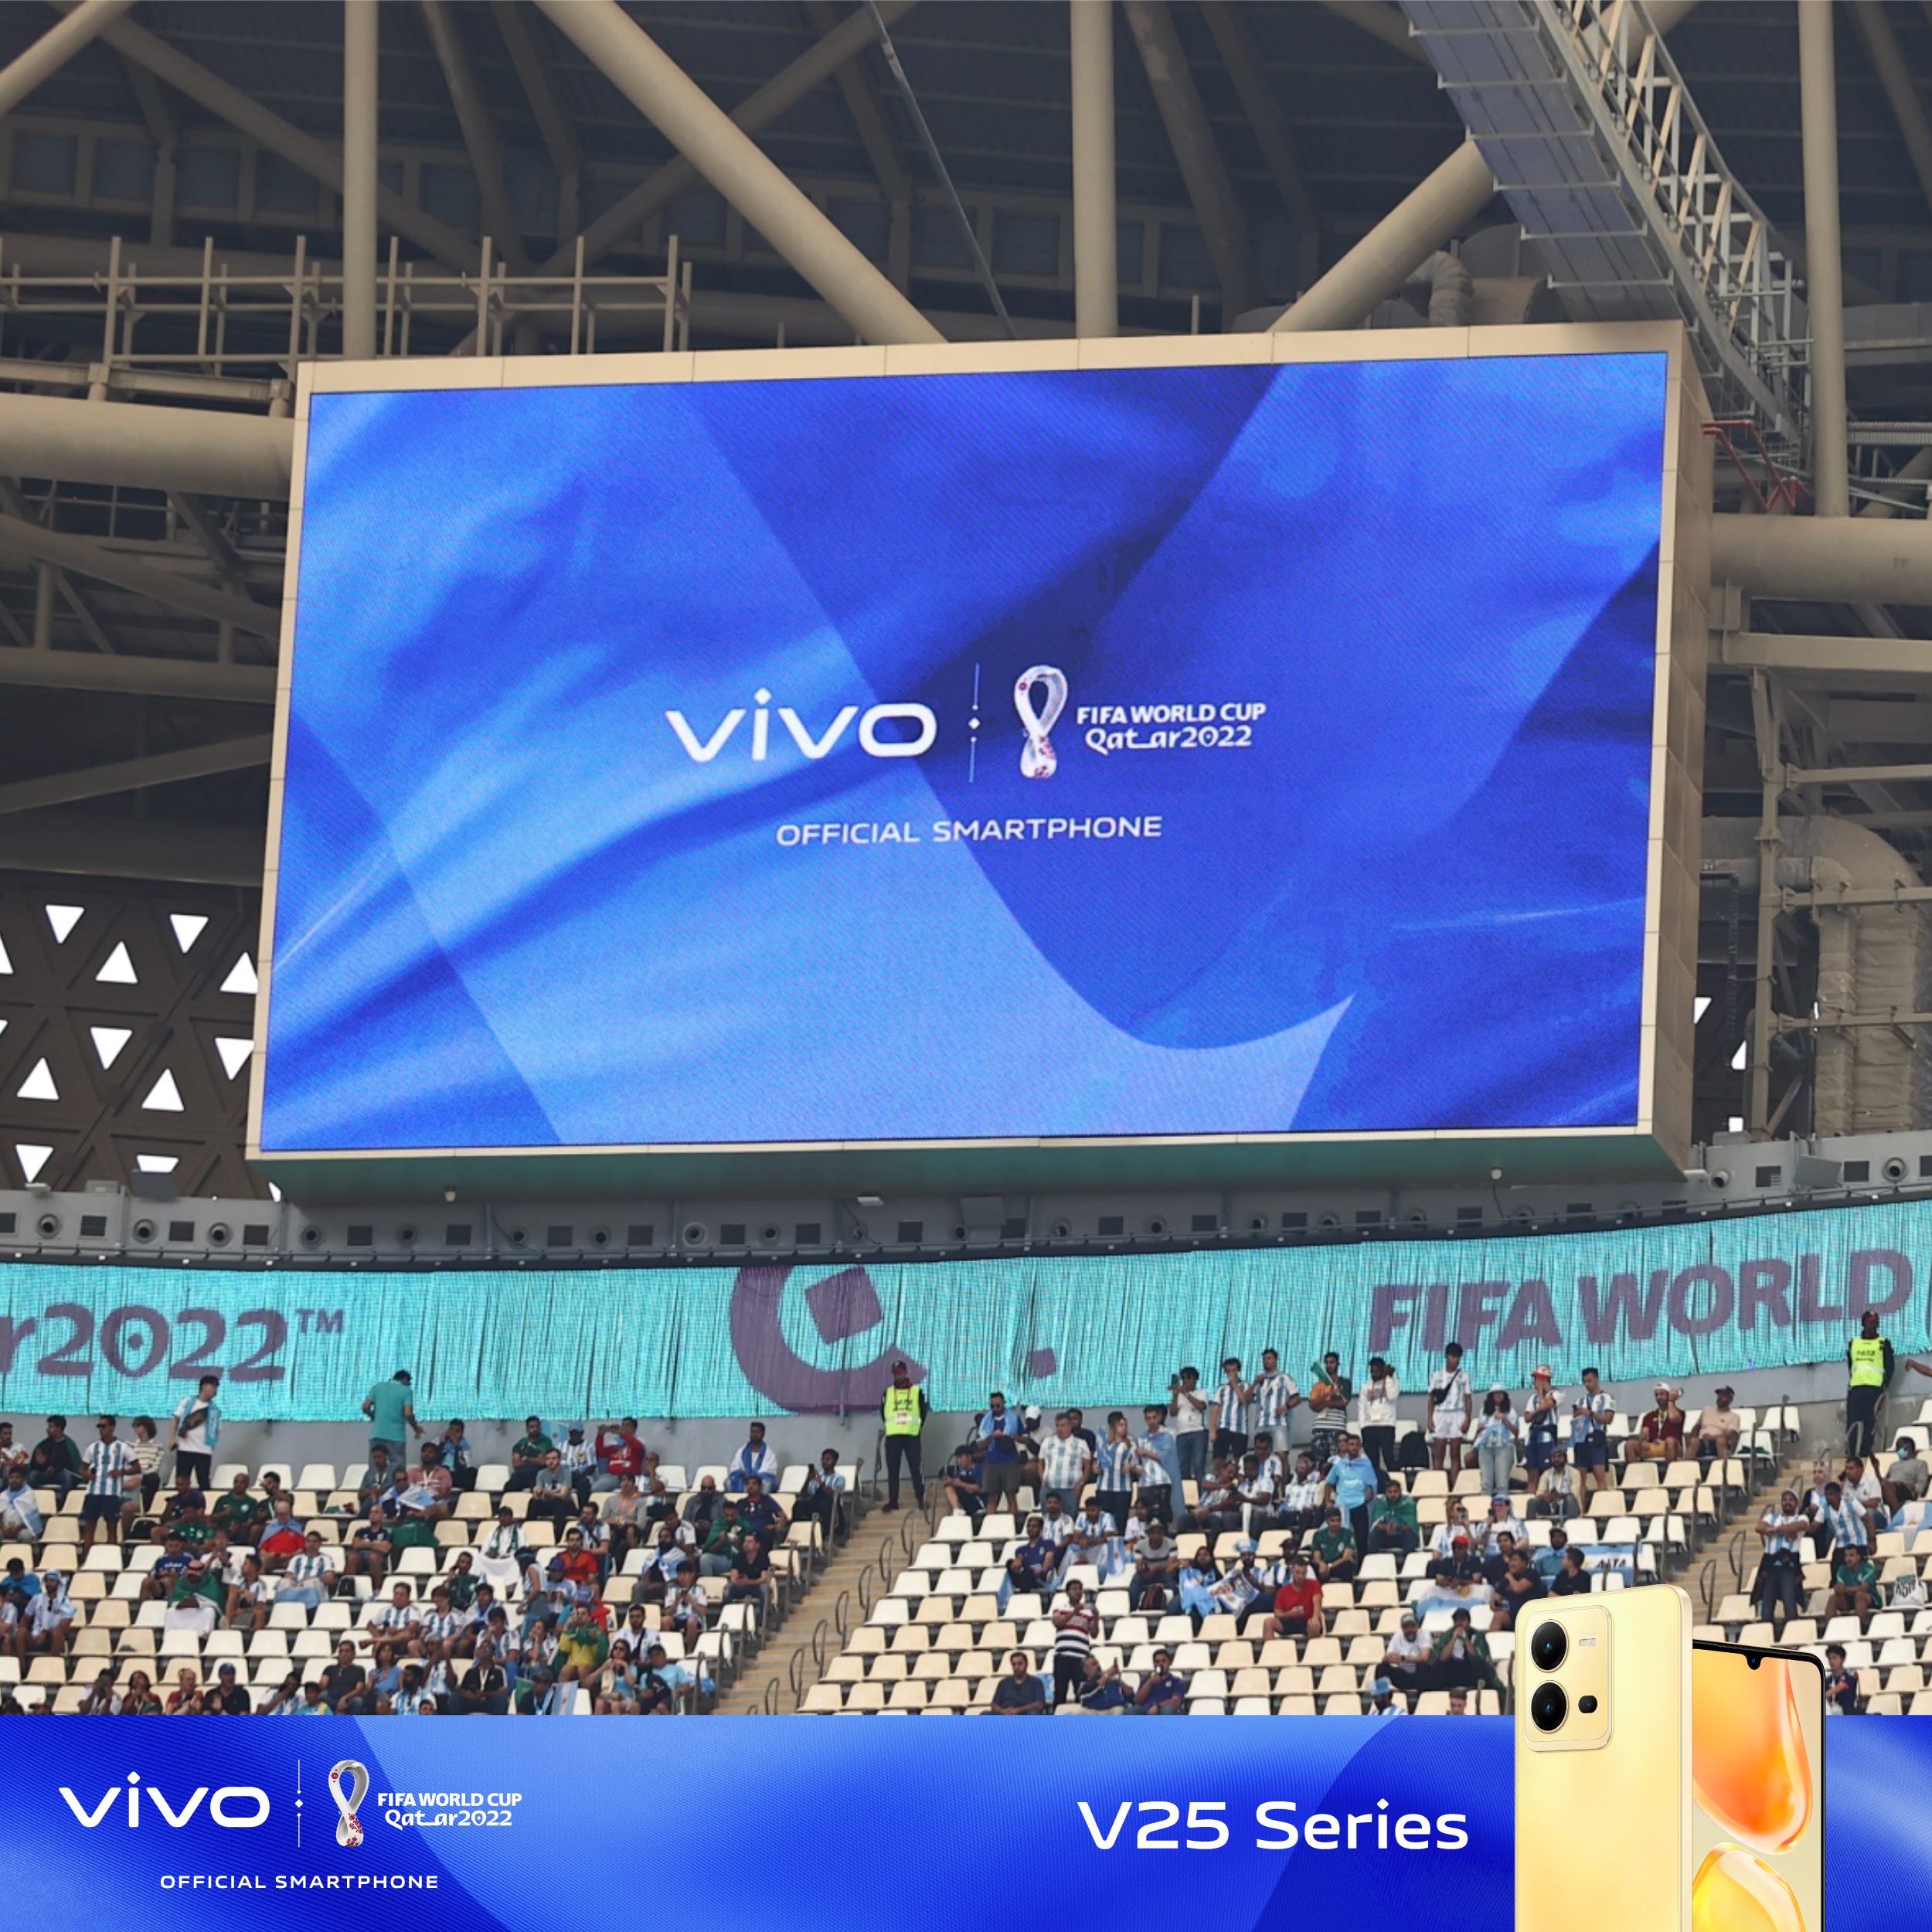 World Cup 2022 Vivo spreading happiness and togetherness through